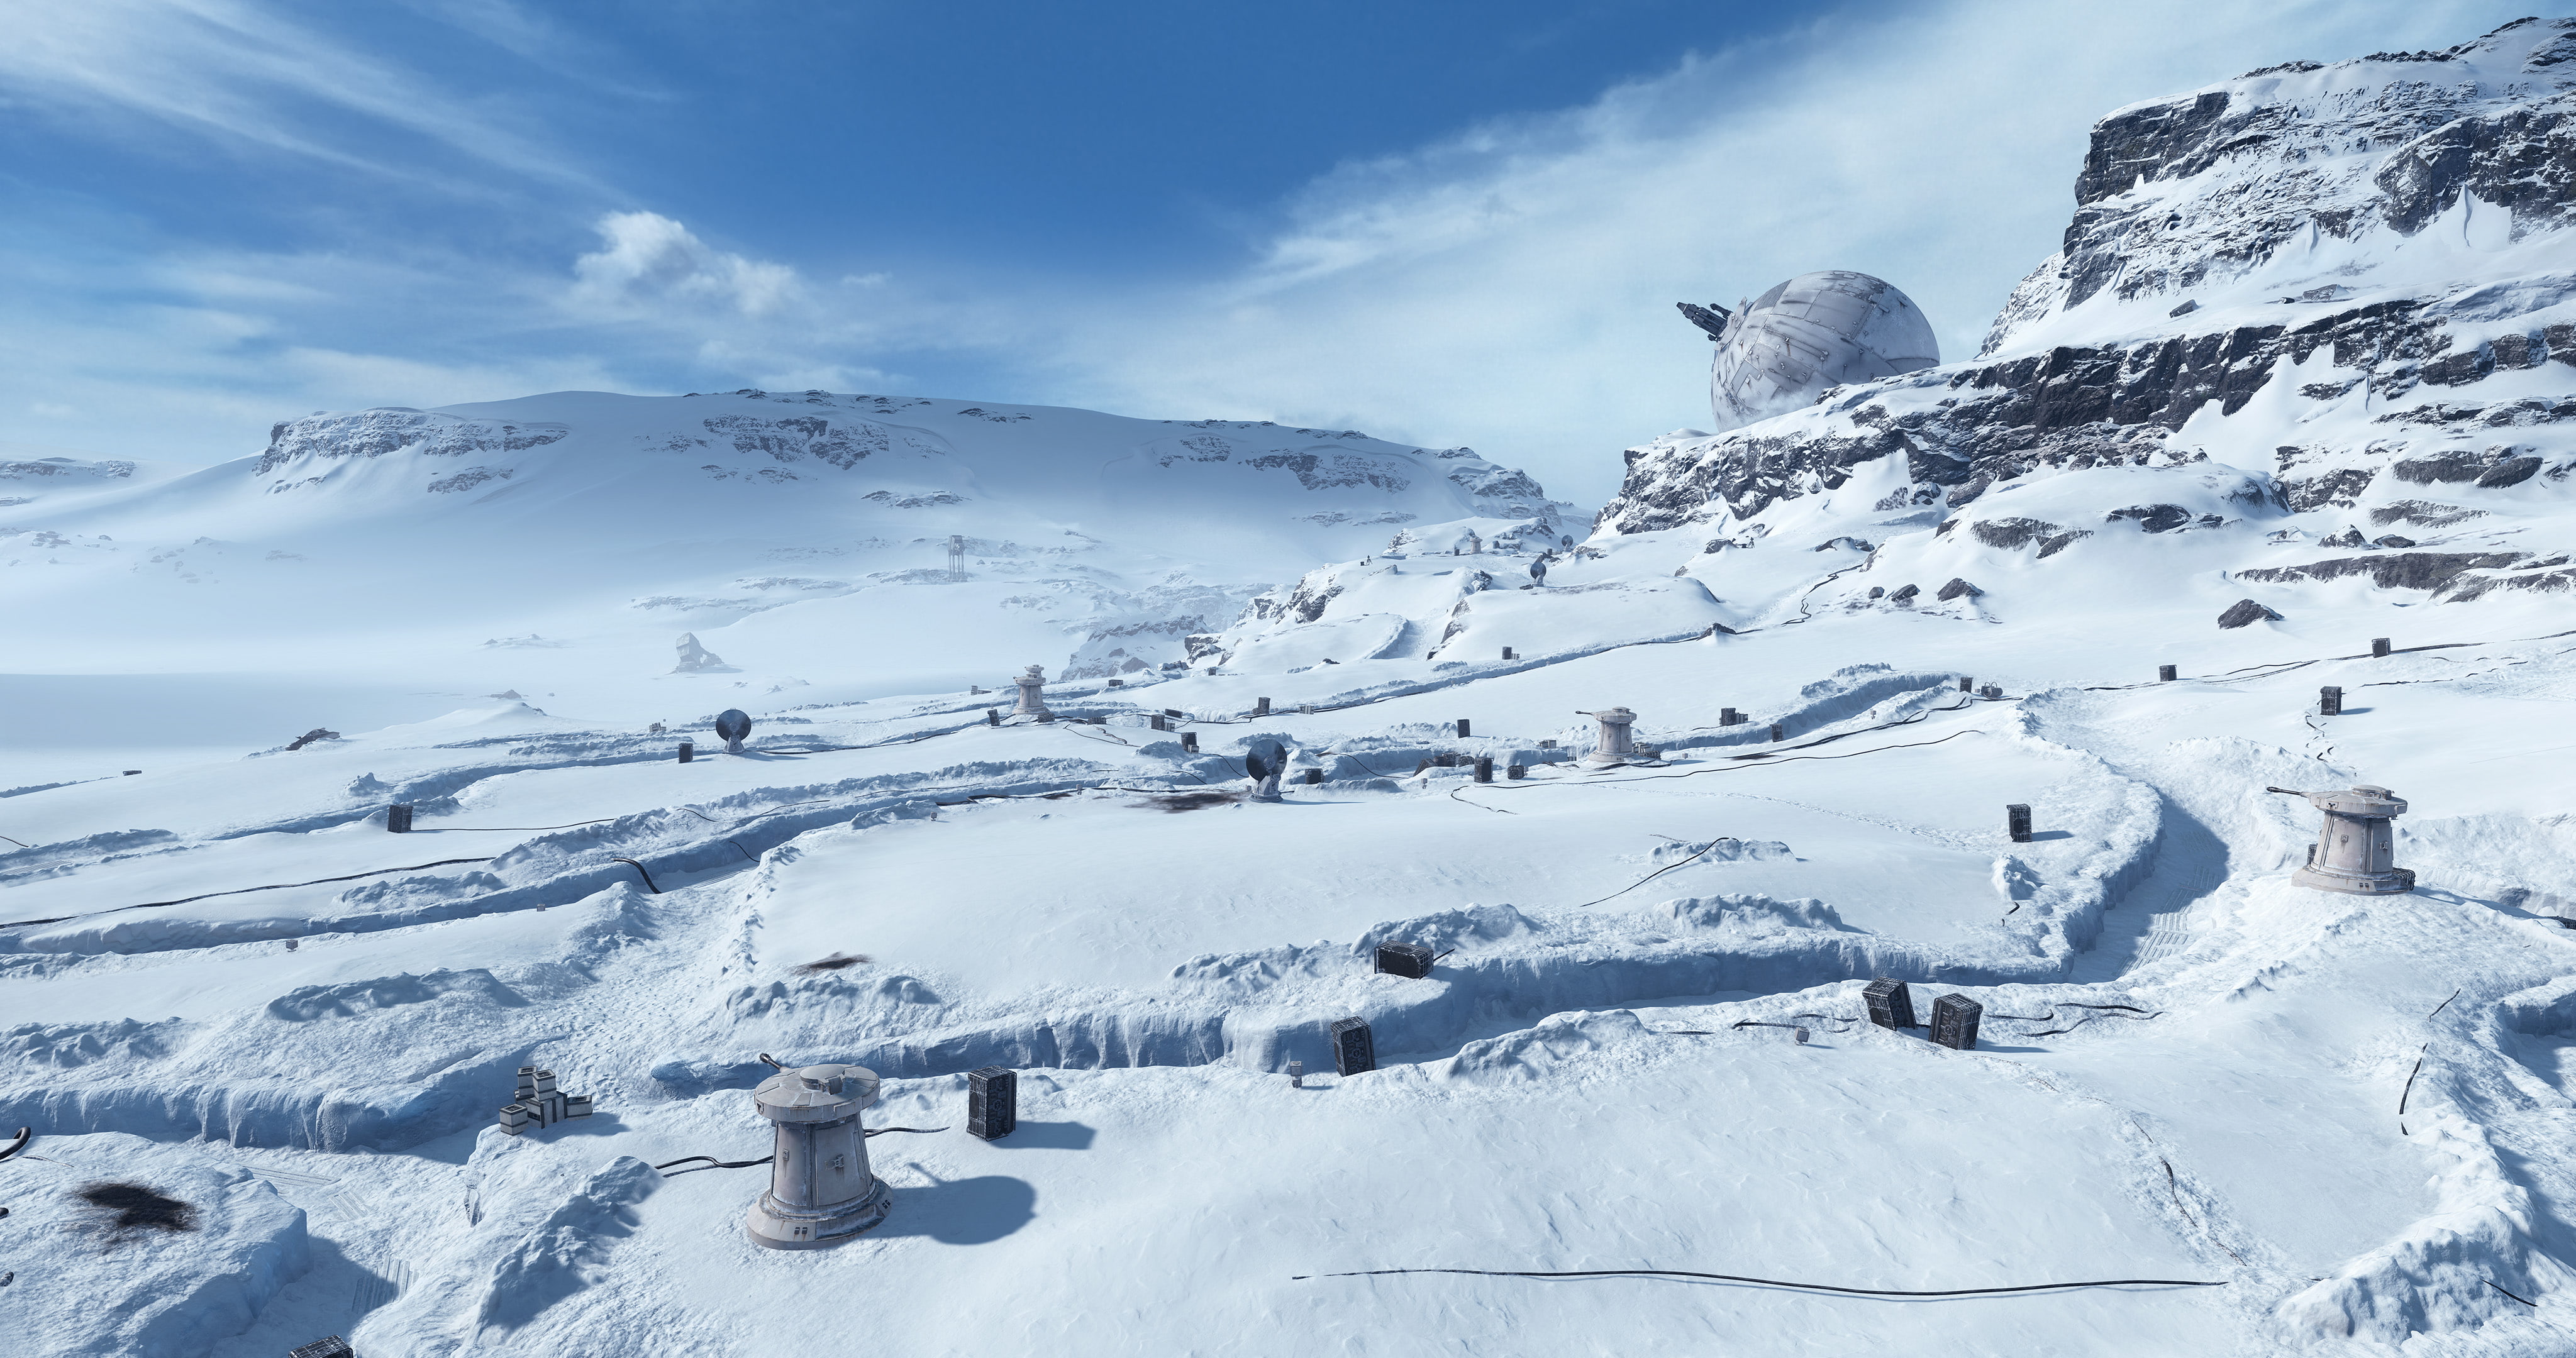 Star Wars, Hoth, snow, cold temperature, winter, beauty in nature